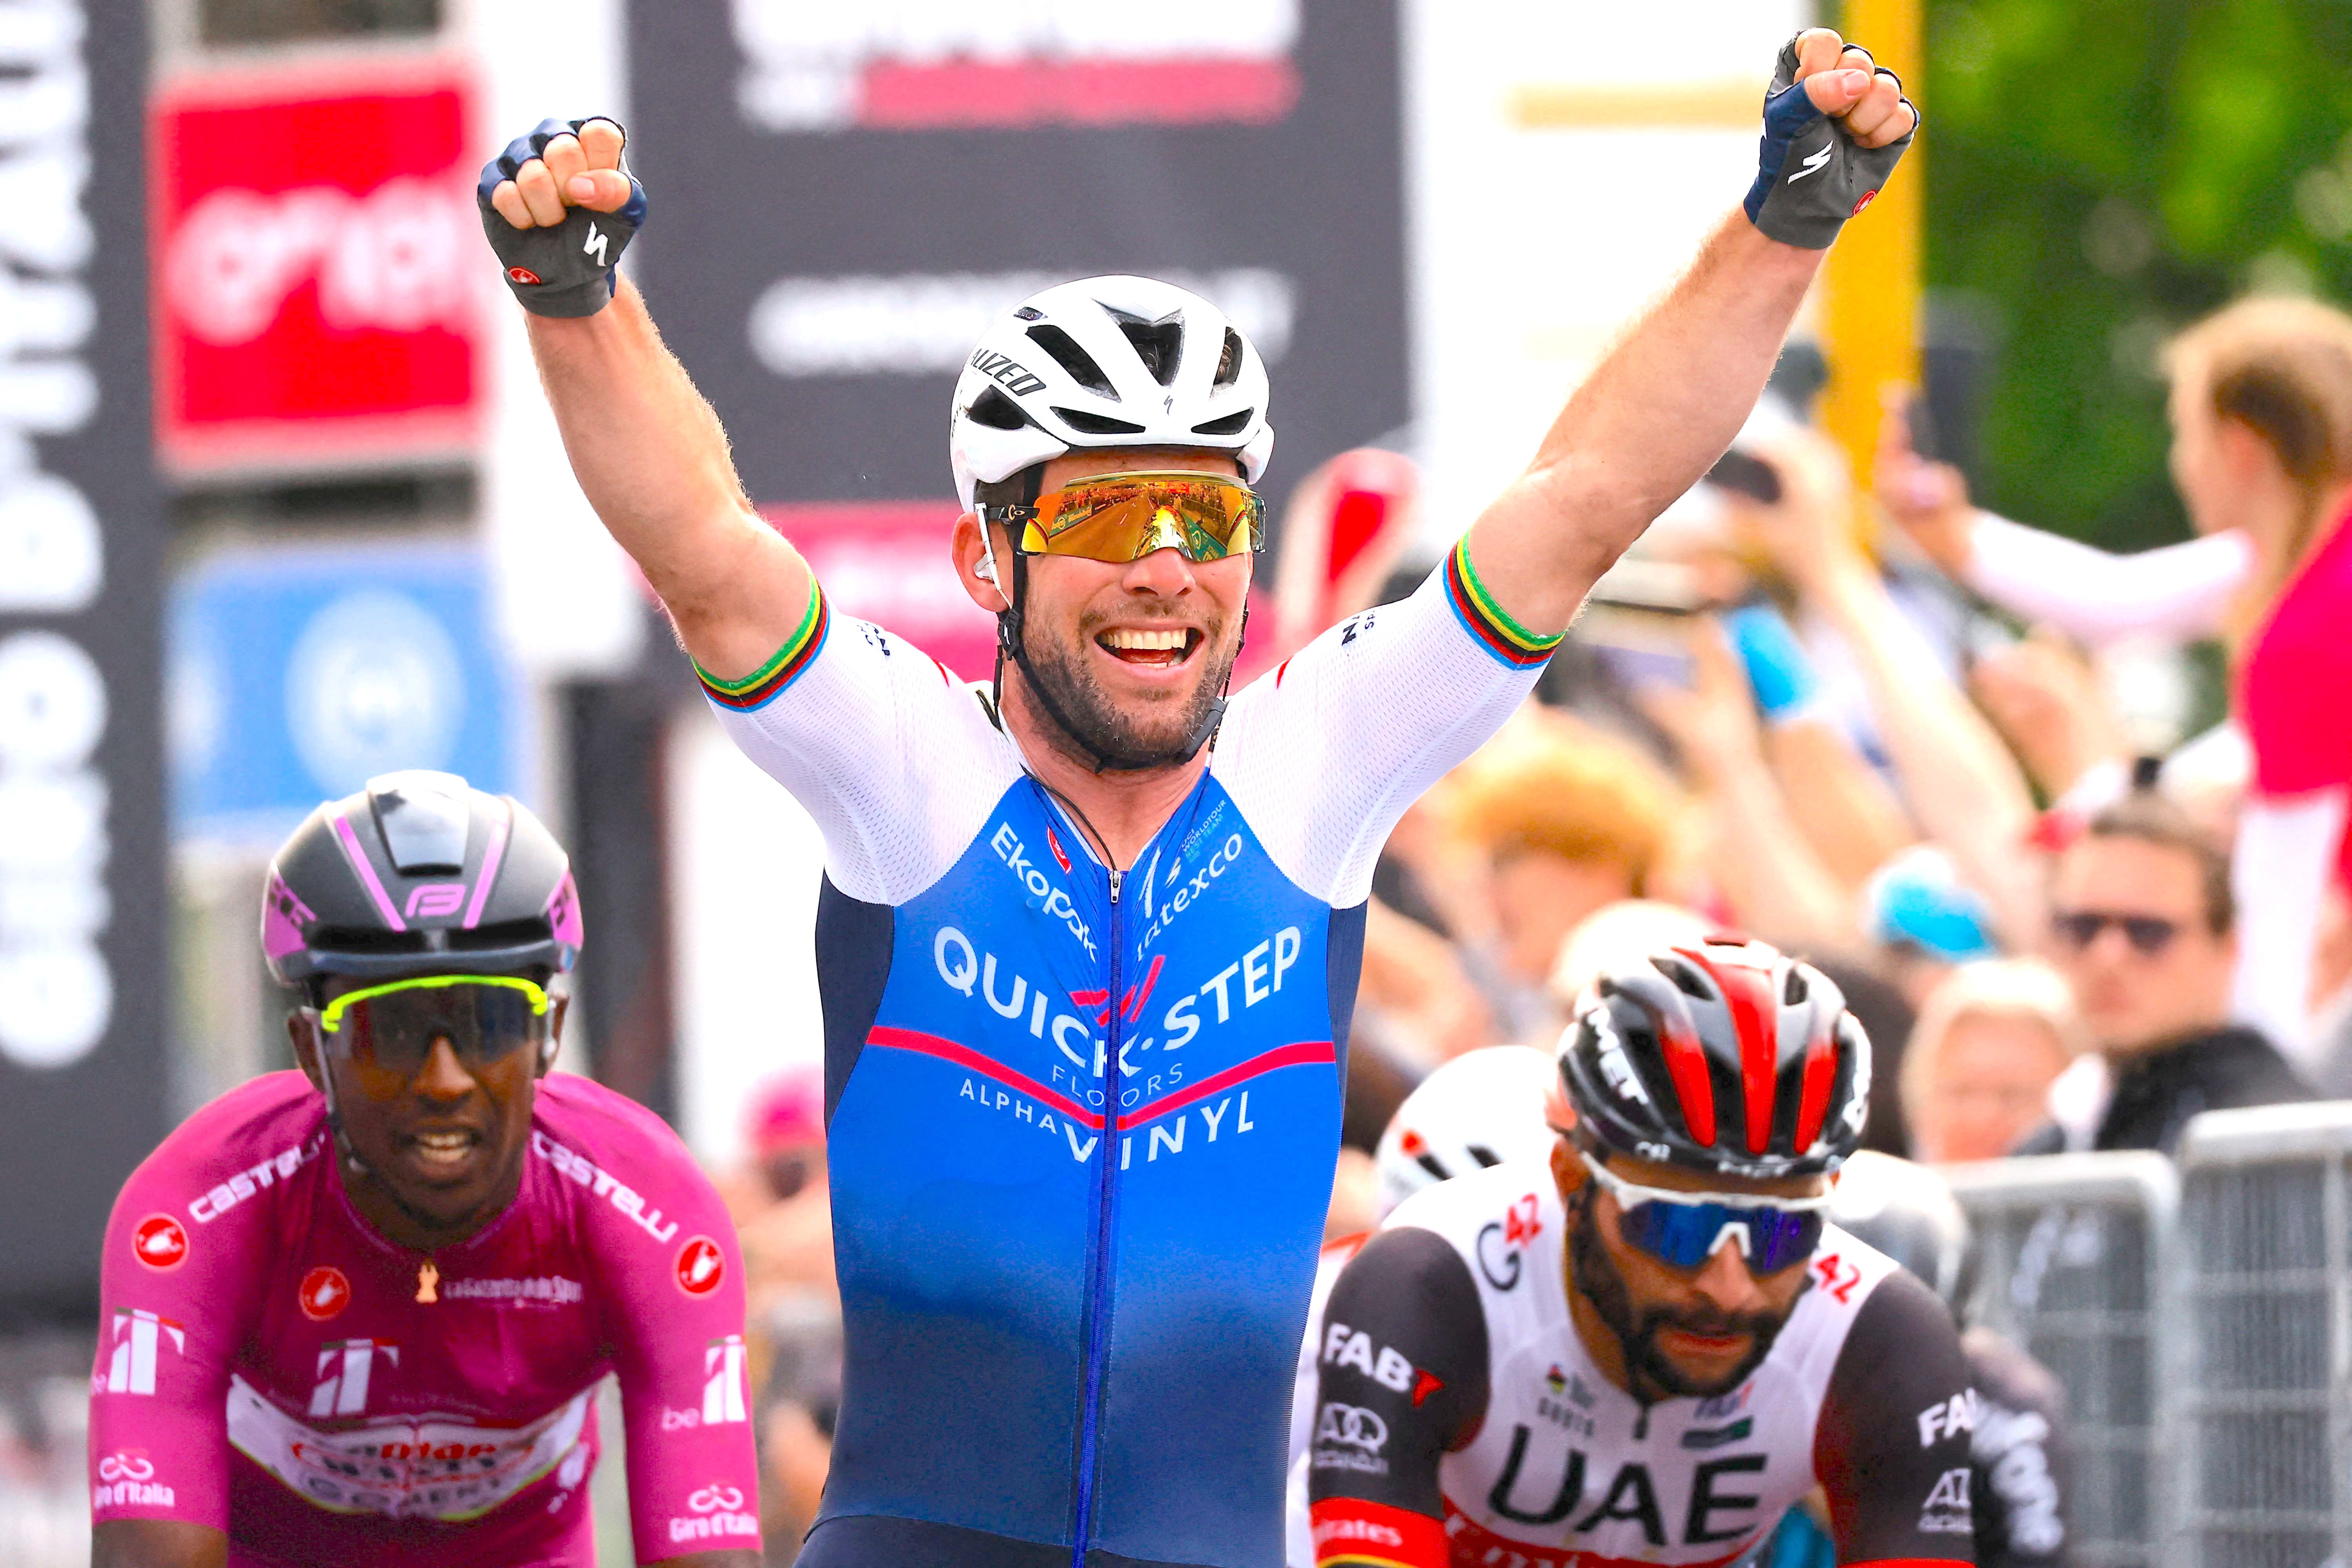 Team Quick-Step Alpha Vinyl's British rider Mark Cavendish celebrates after he crossed the finish line to win the third stage of the Giro d'Italia 2022 cycling race, 201 kilometers between Kaposvar and Balatonfured, Hungary, on May 8, 2022. (Photo by Luca Bettini / AFP) (Photo by LUCA BETTINI/AFP via Getty Images)